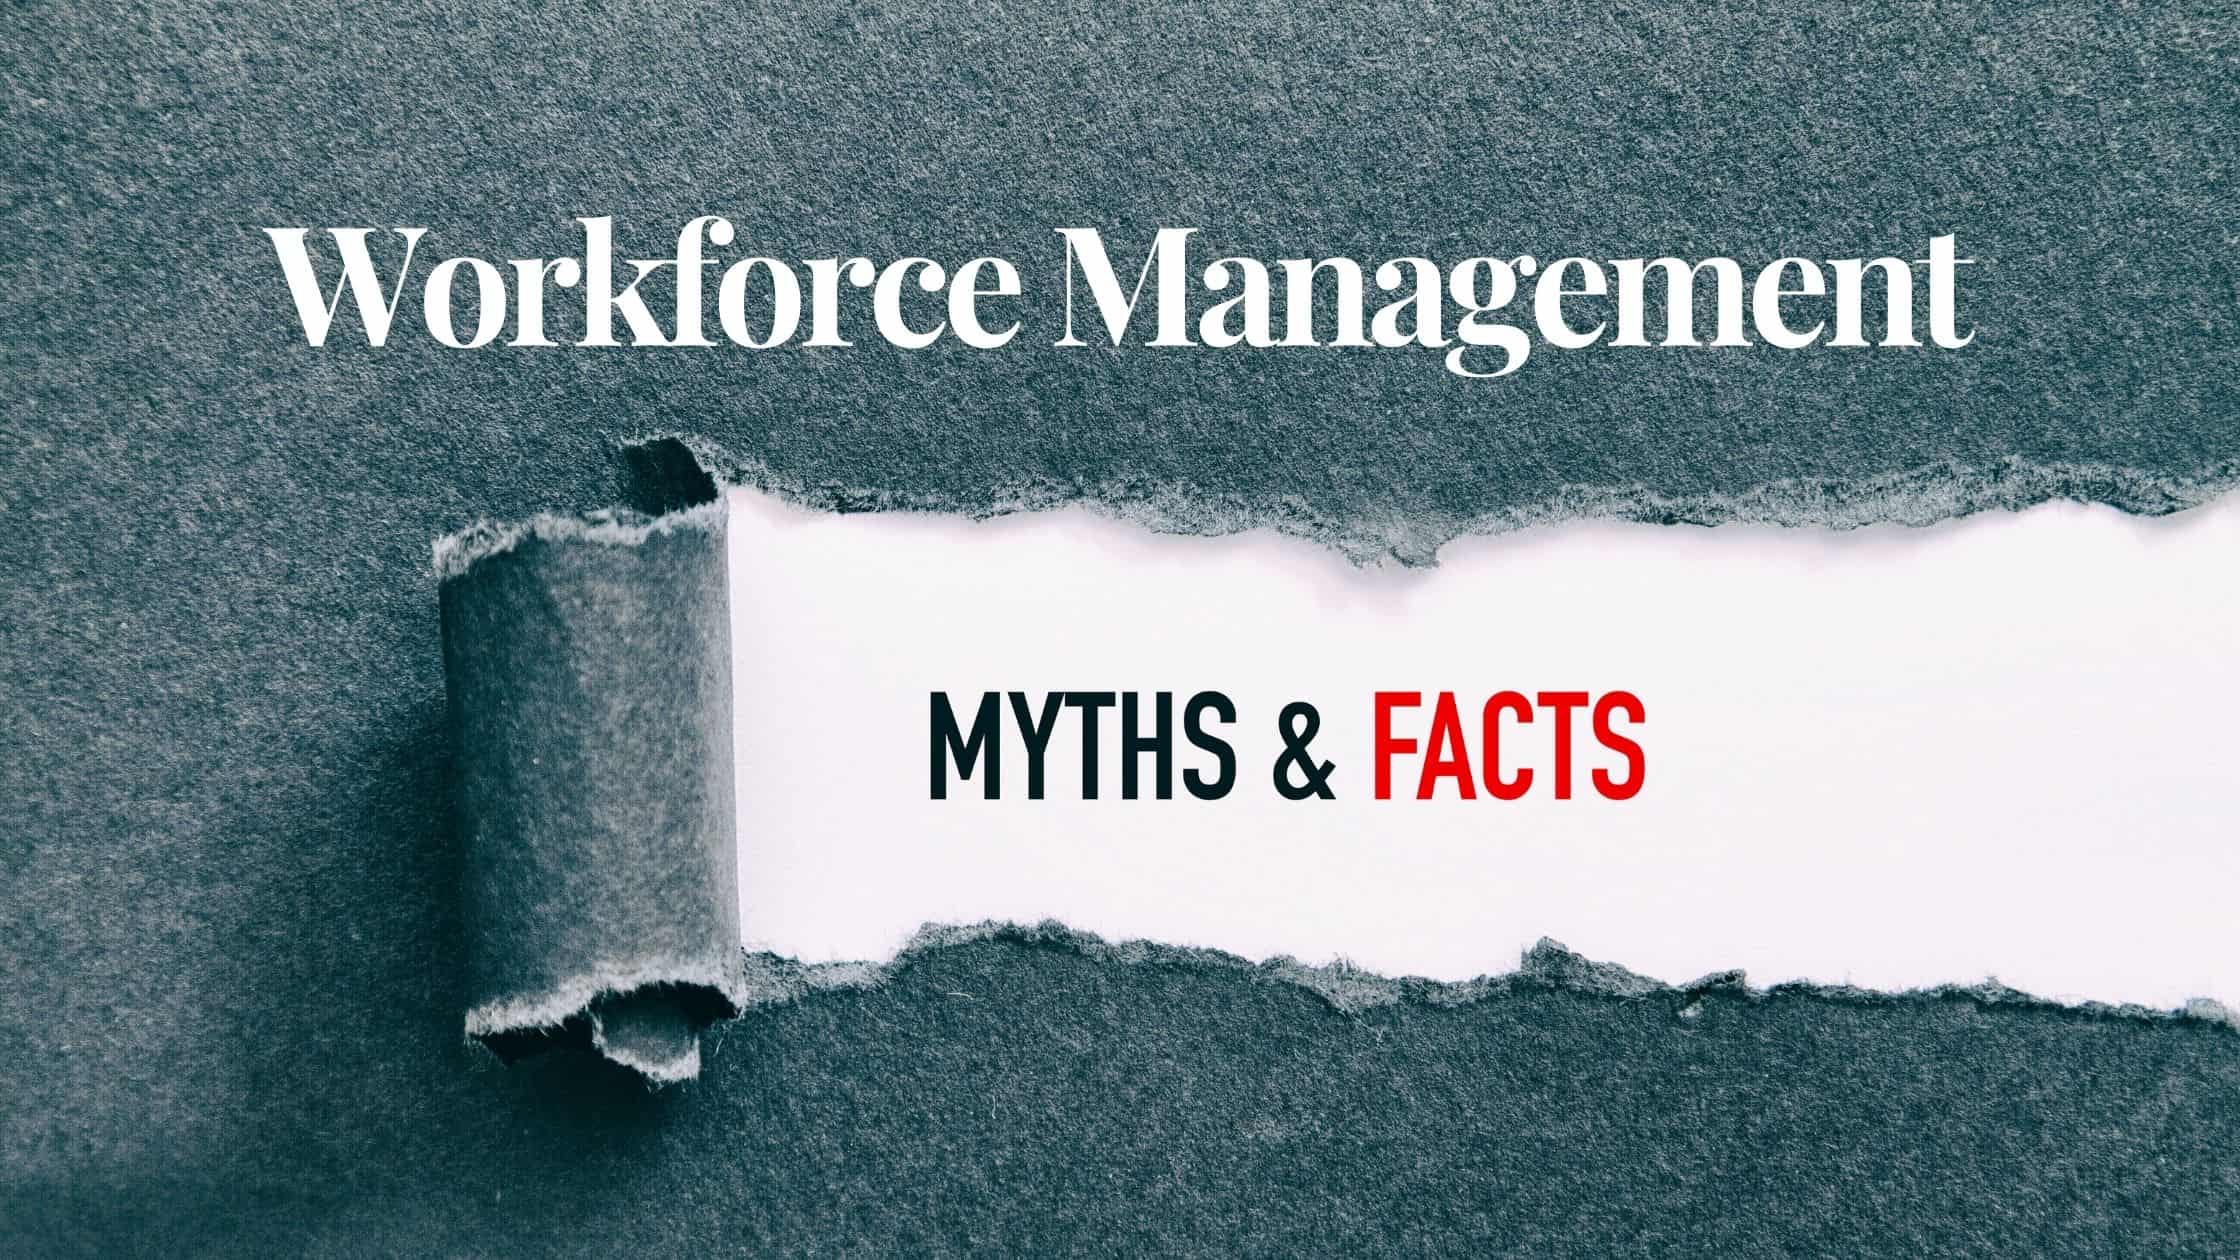 Common workforce management myths that disable your organization's ability to perform.